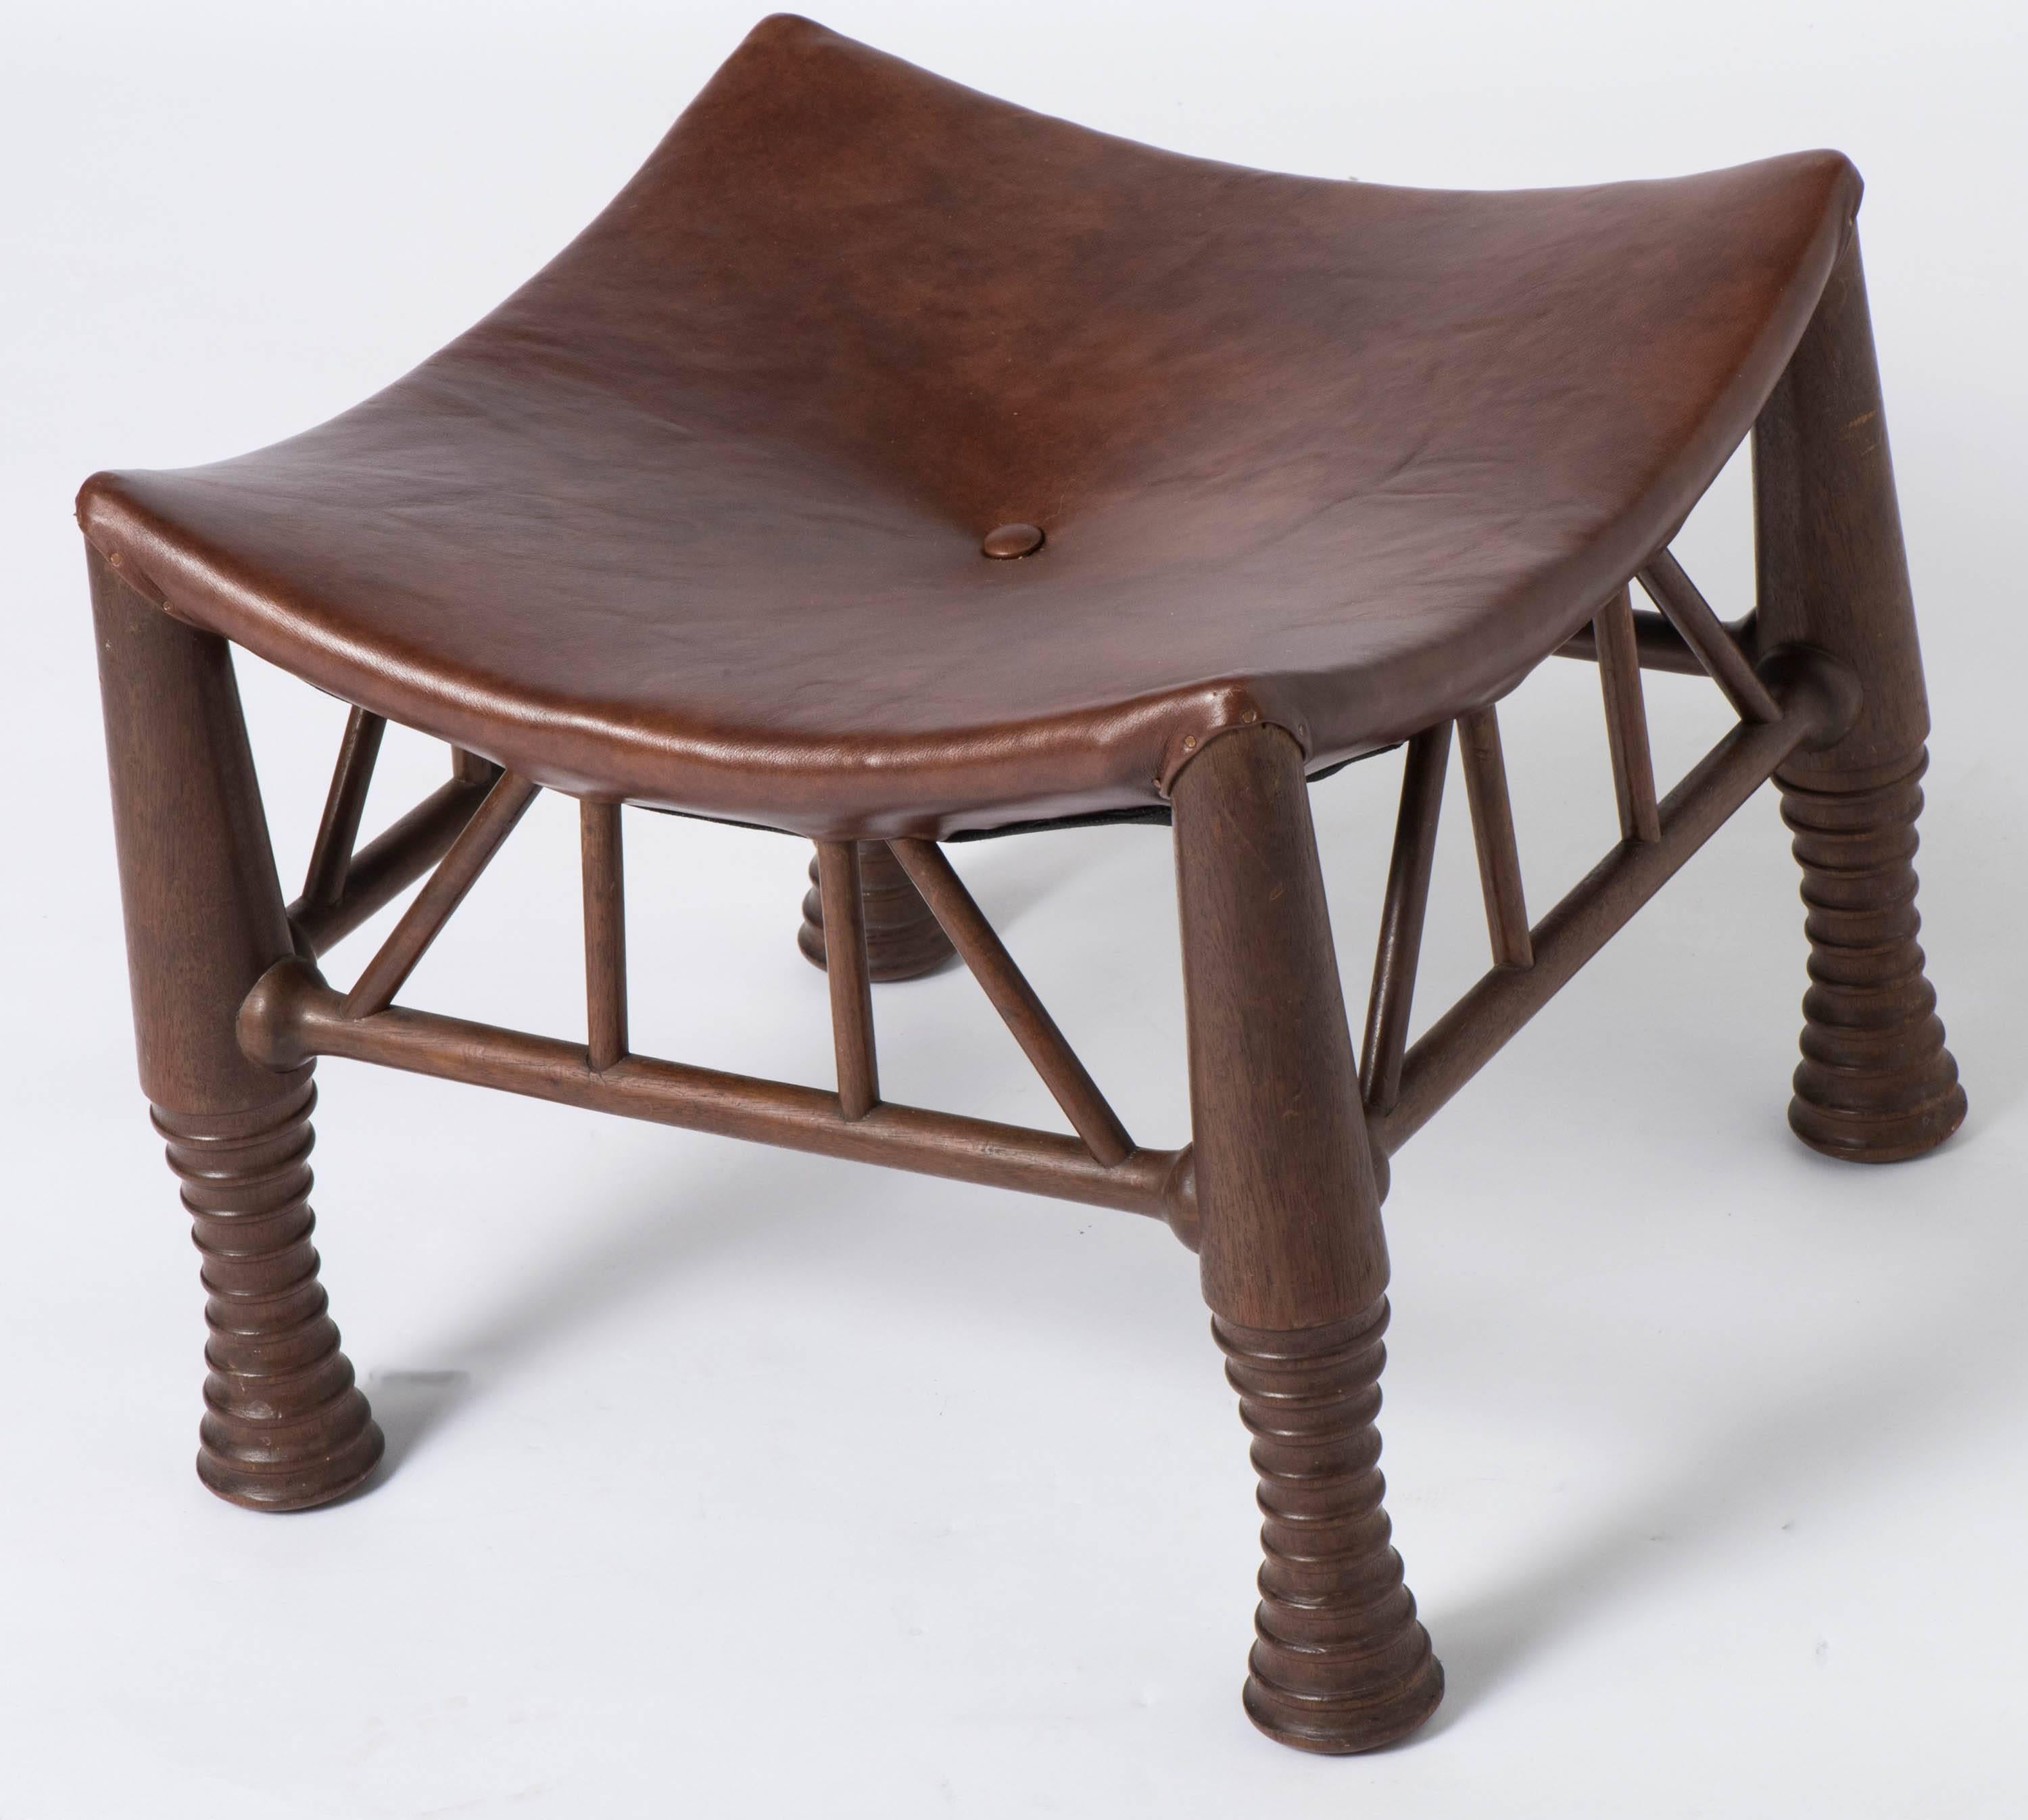 A large mahogany Thebes Stool by Liberty and Co, London.
With leather upholstered dished seat. Raised on ring turned supports linked by stretchers.
England, circa 1900
Measures: 44 cm wide x 44 cm deep x 37 cm high.